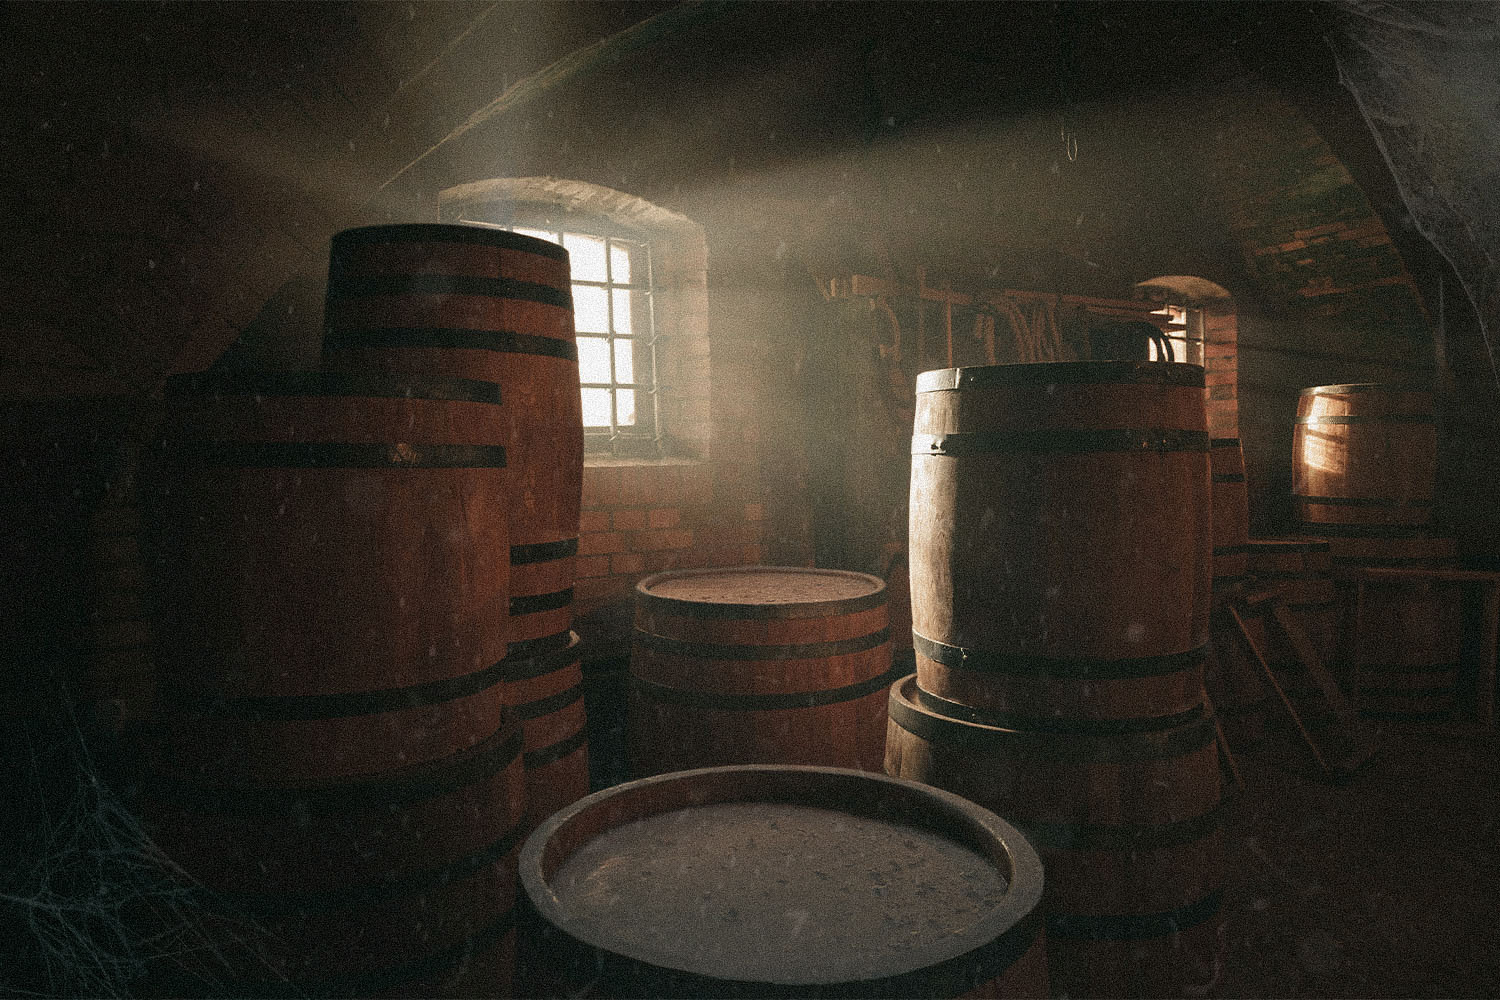 whisky aging in barrels in a dusty warehouse. Aging whisky for a long time (50+ years) presents unusual challenges.